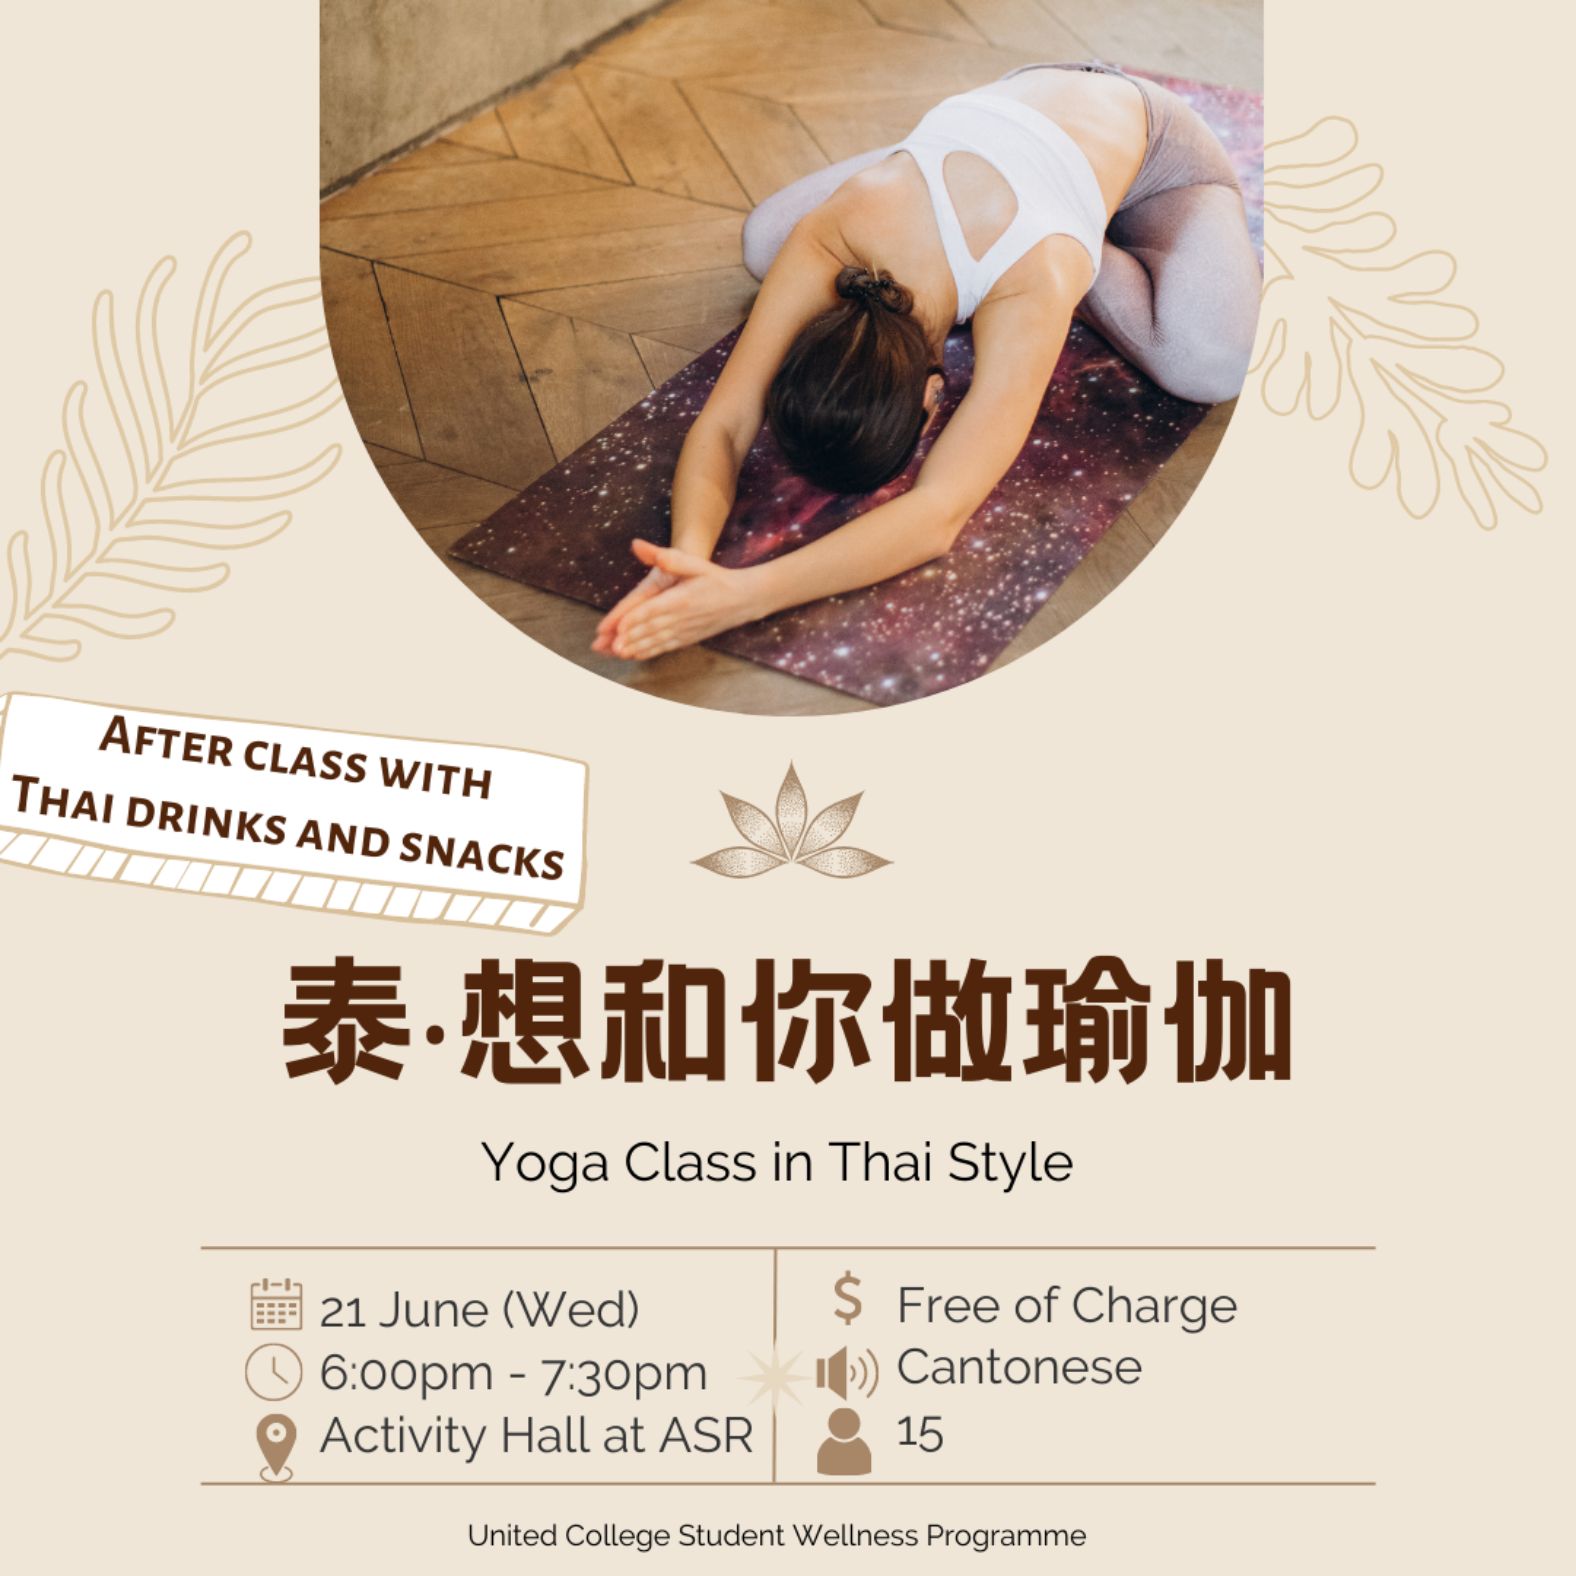 Our Class Types - Modern Yoga